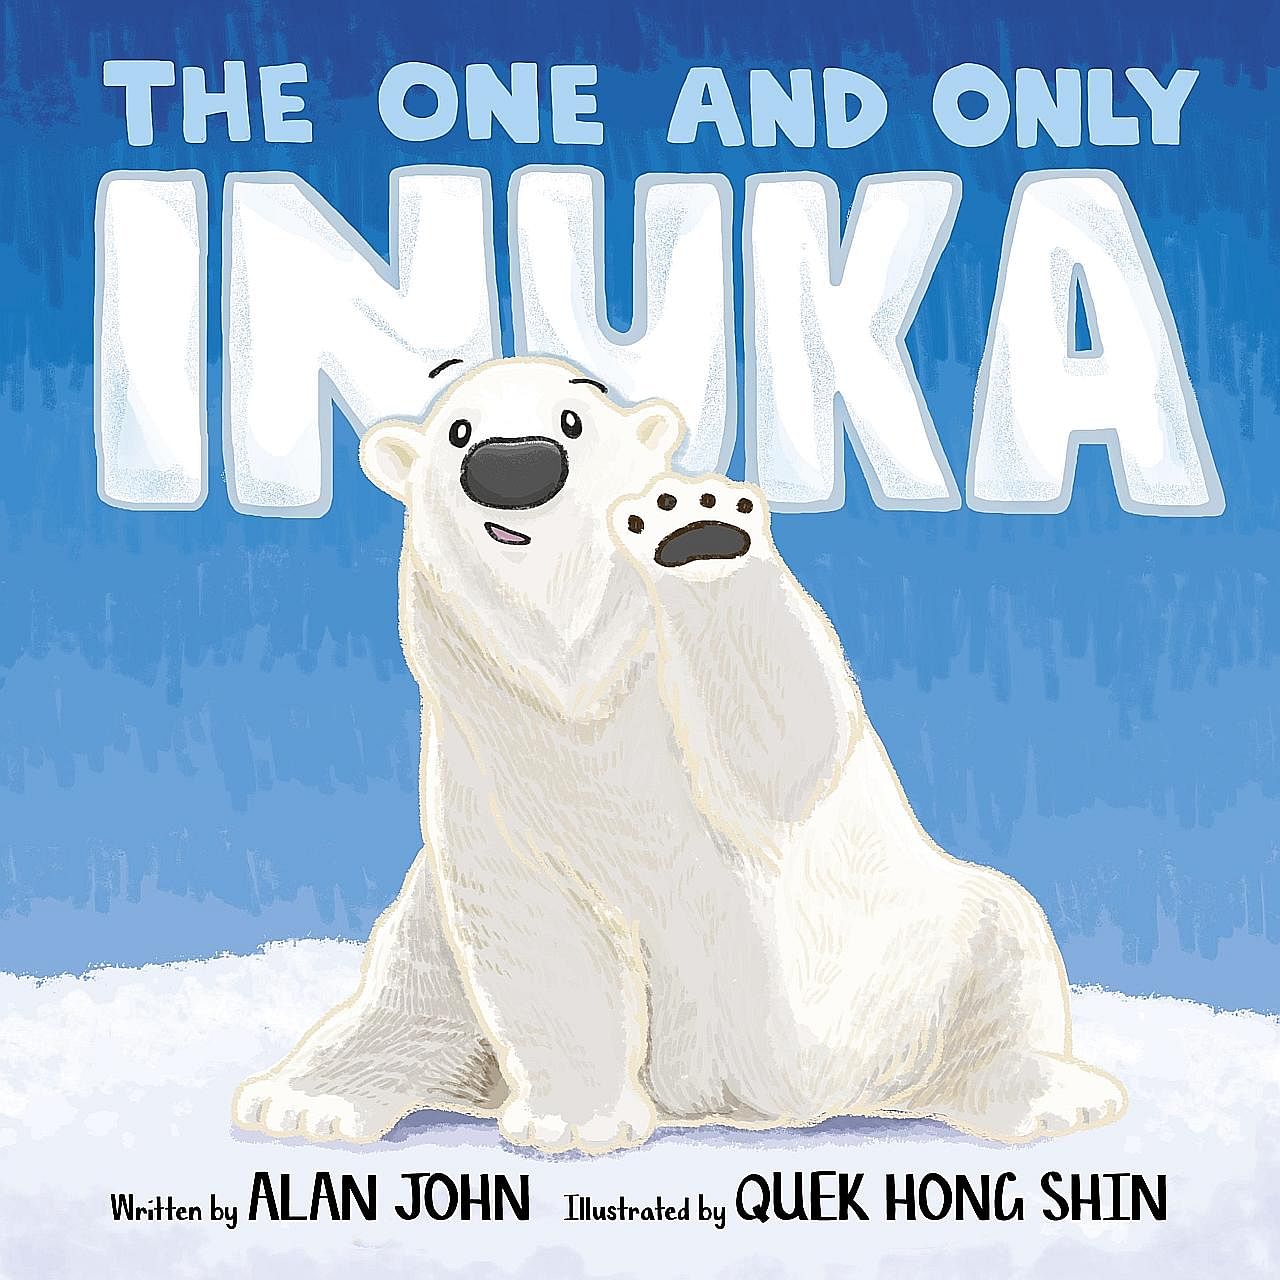 Written by former deputy editor of The Straits Times Alan John, the book recalls the life of the first polar bear born in the tropics "with love and fond memories".